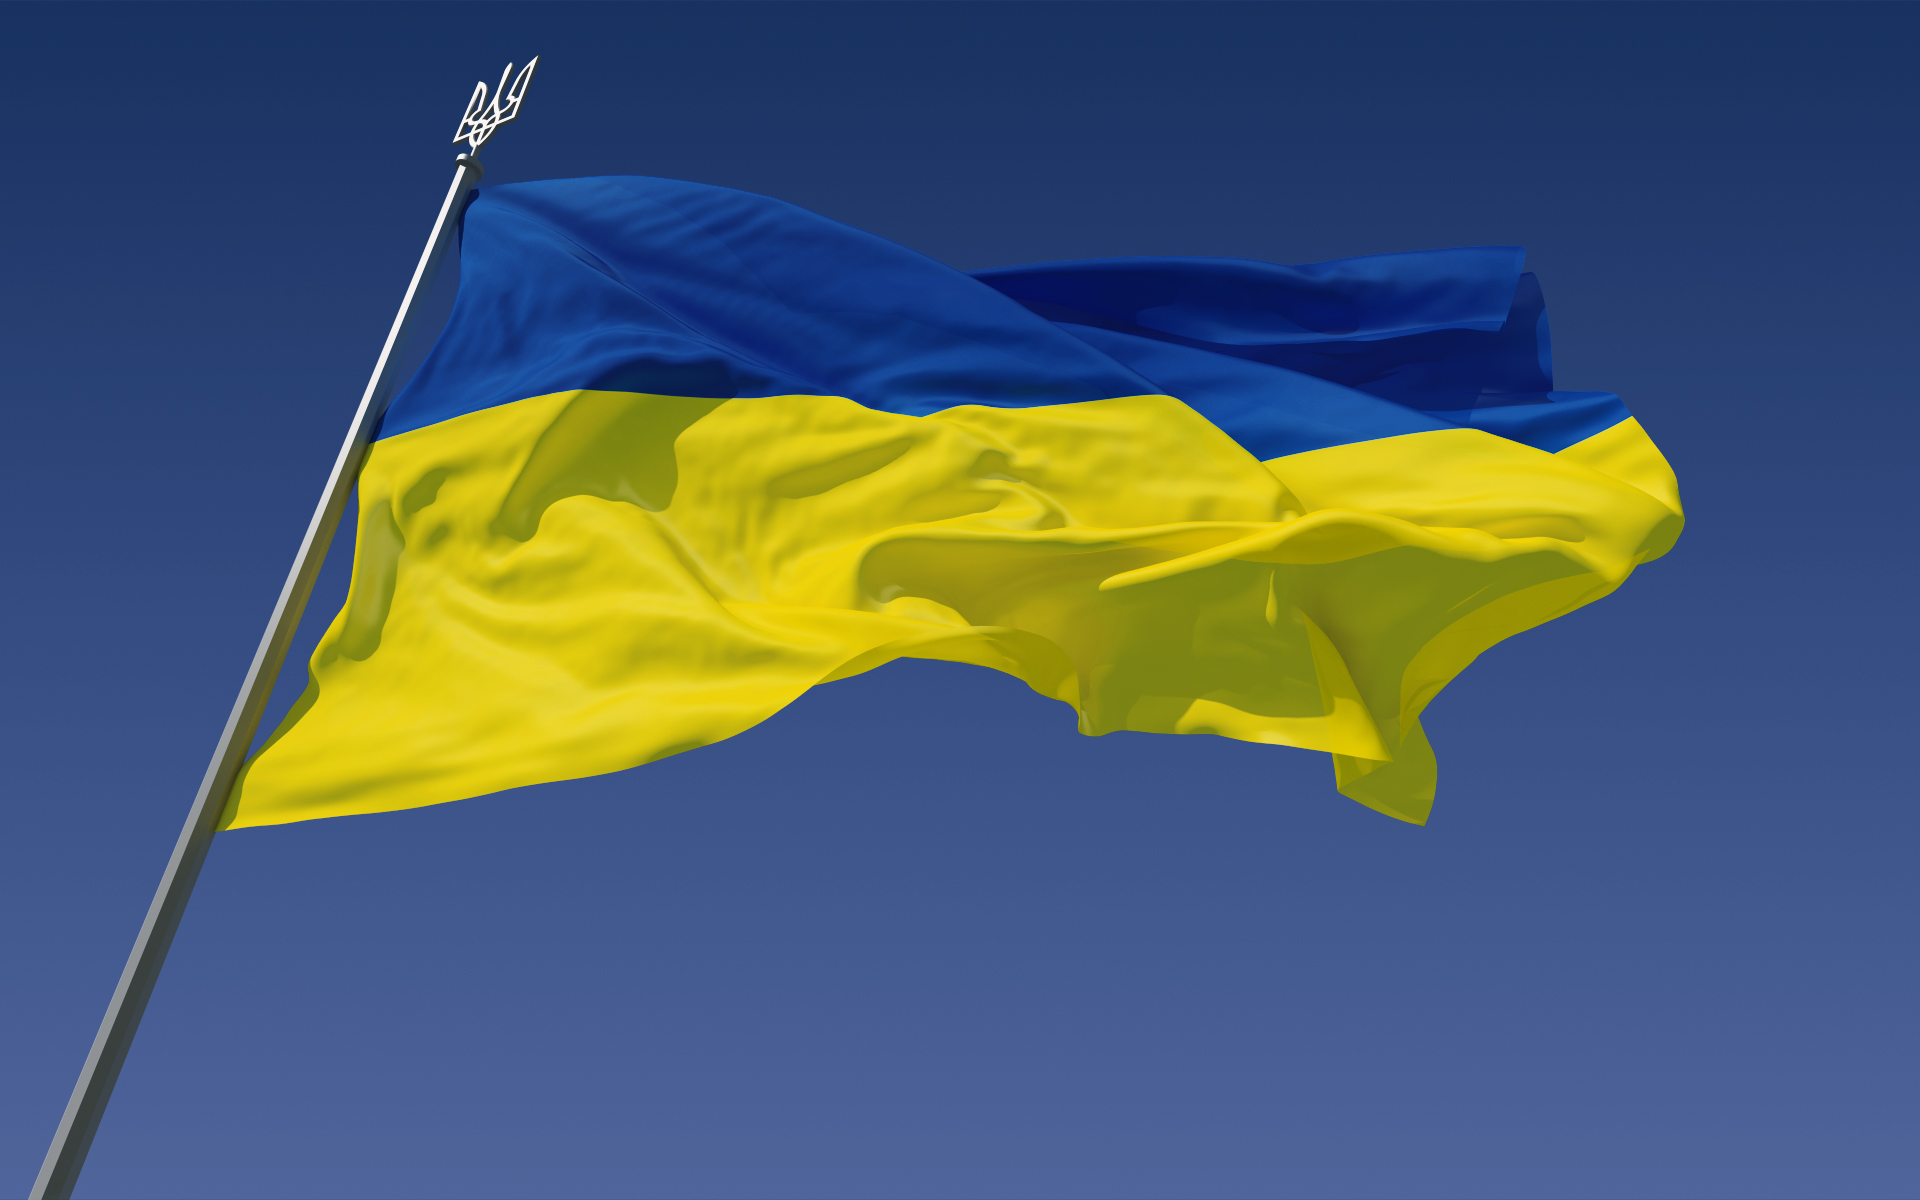 ADEE Executive issues statement on the crisis in Ukraine